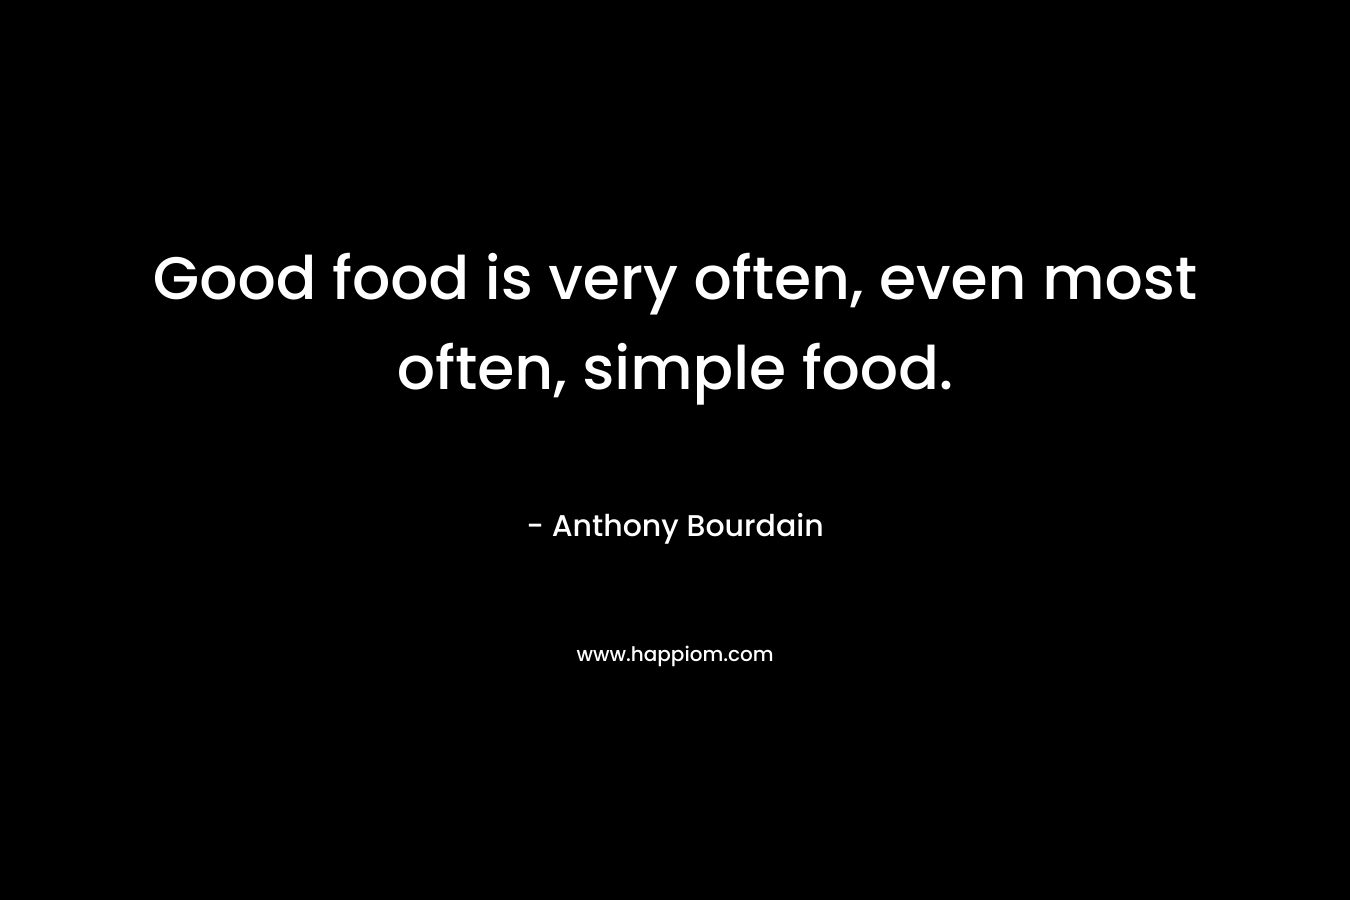 Good food is very often, even most often, simple food. – Anthony Bourdain